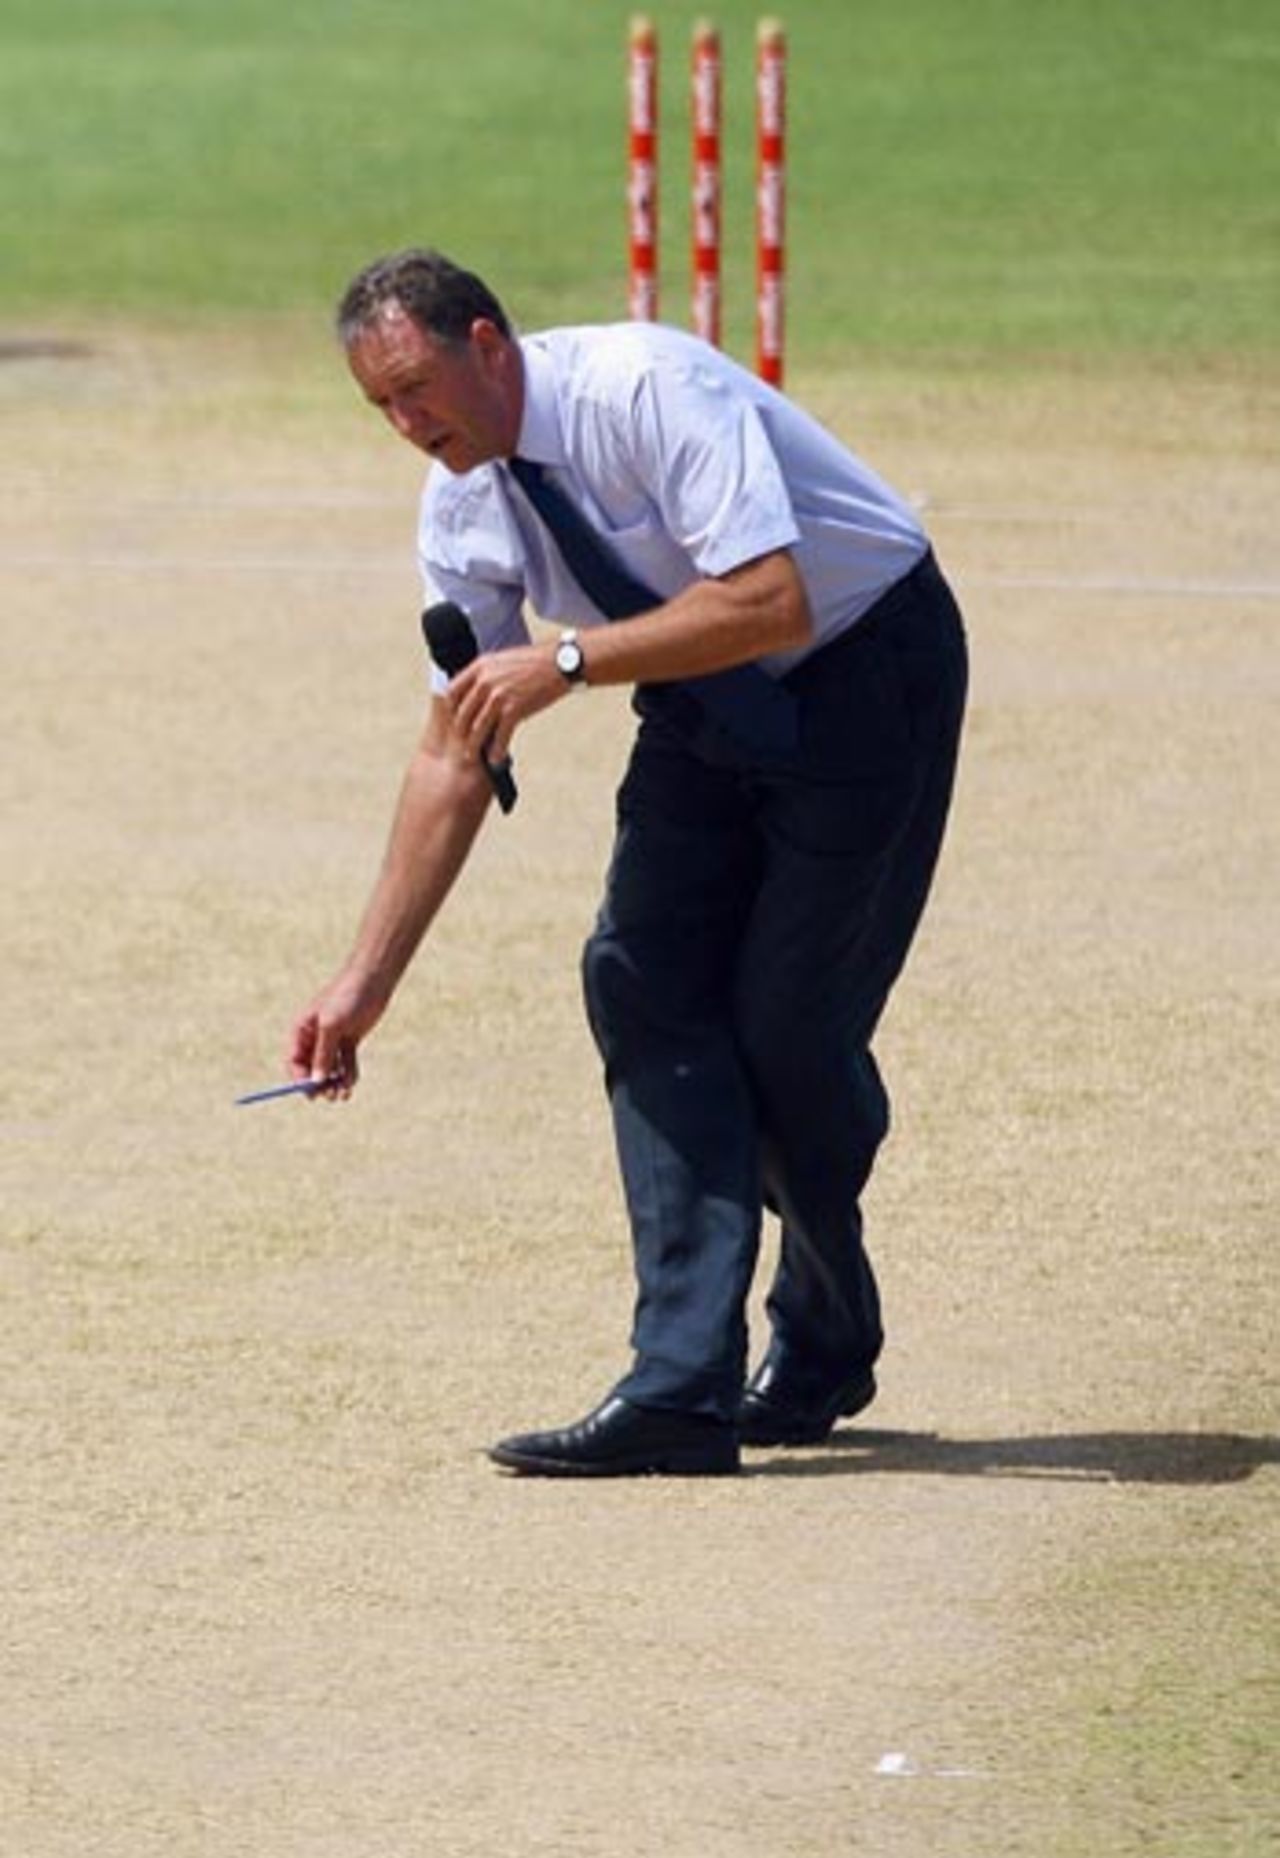 Jeremy Coney does the pitch report ahead of the third Test between West Indies and India, St Kitts, June 22, 2006